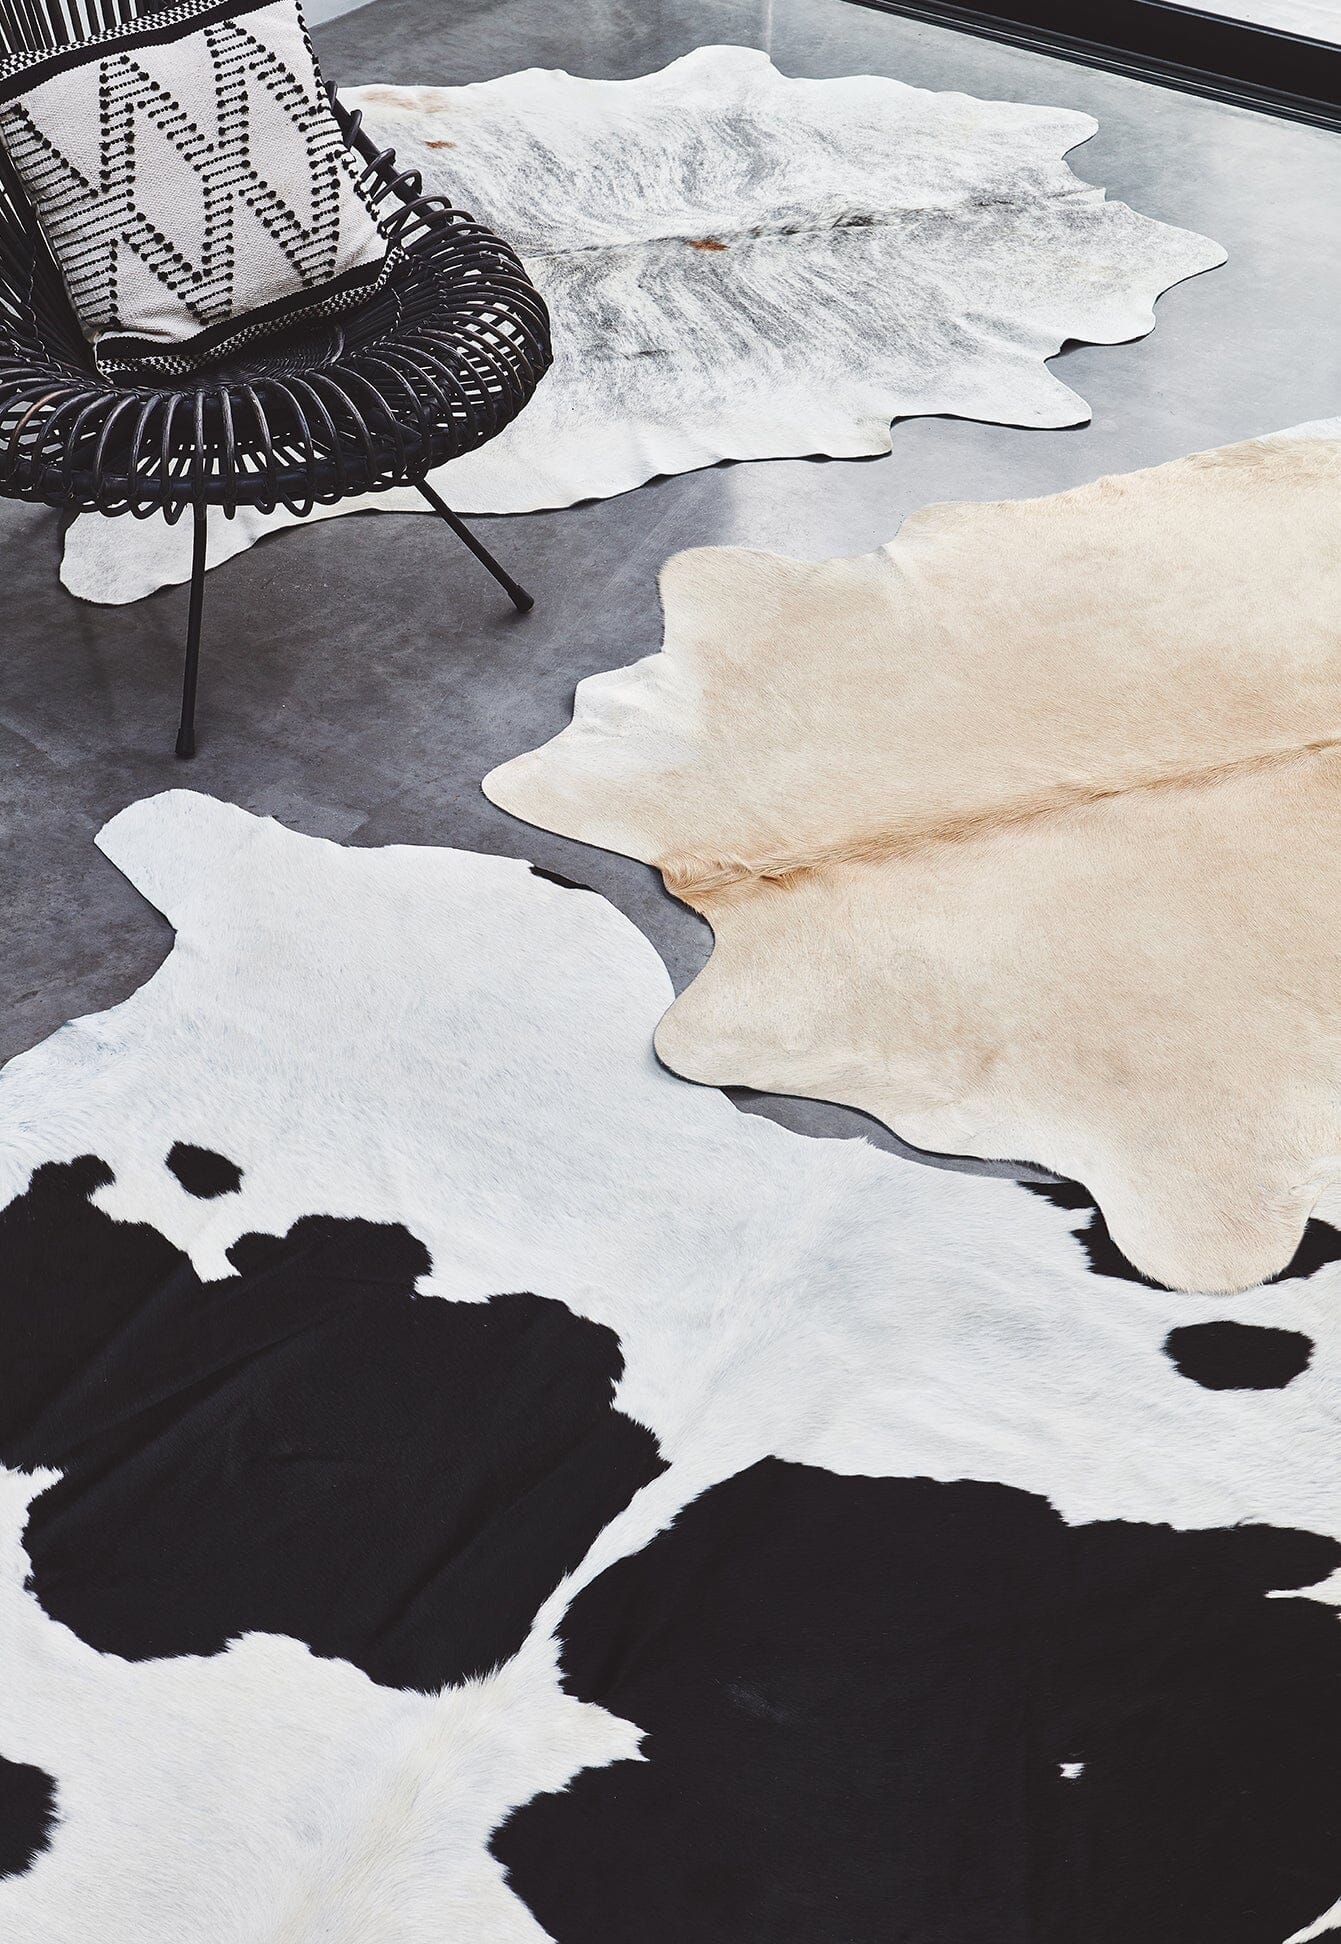 Asiatic Carpets Rodeo Cowhide Hand Finished Rug Black & White - 100 x 100cm